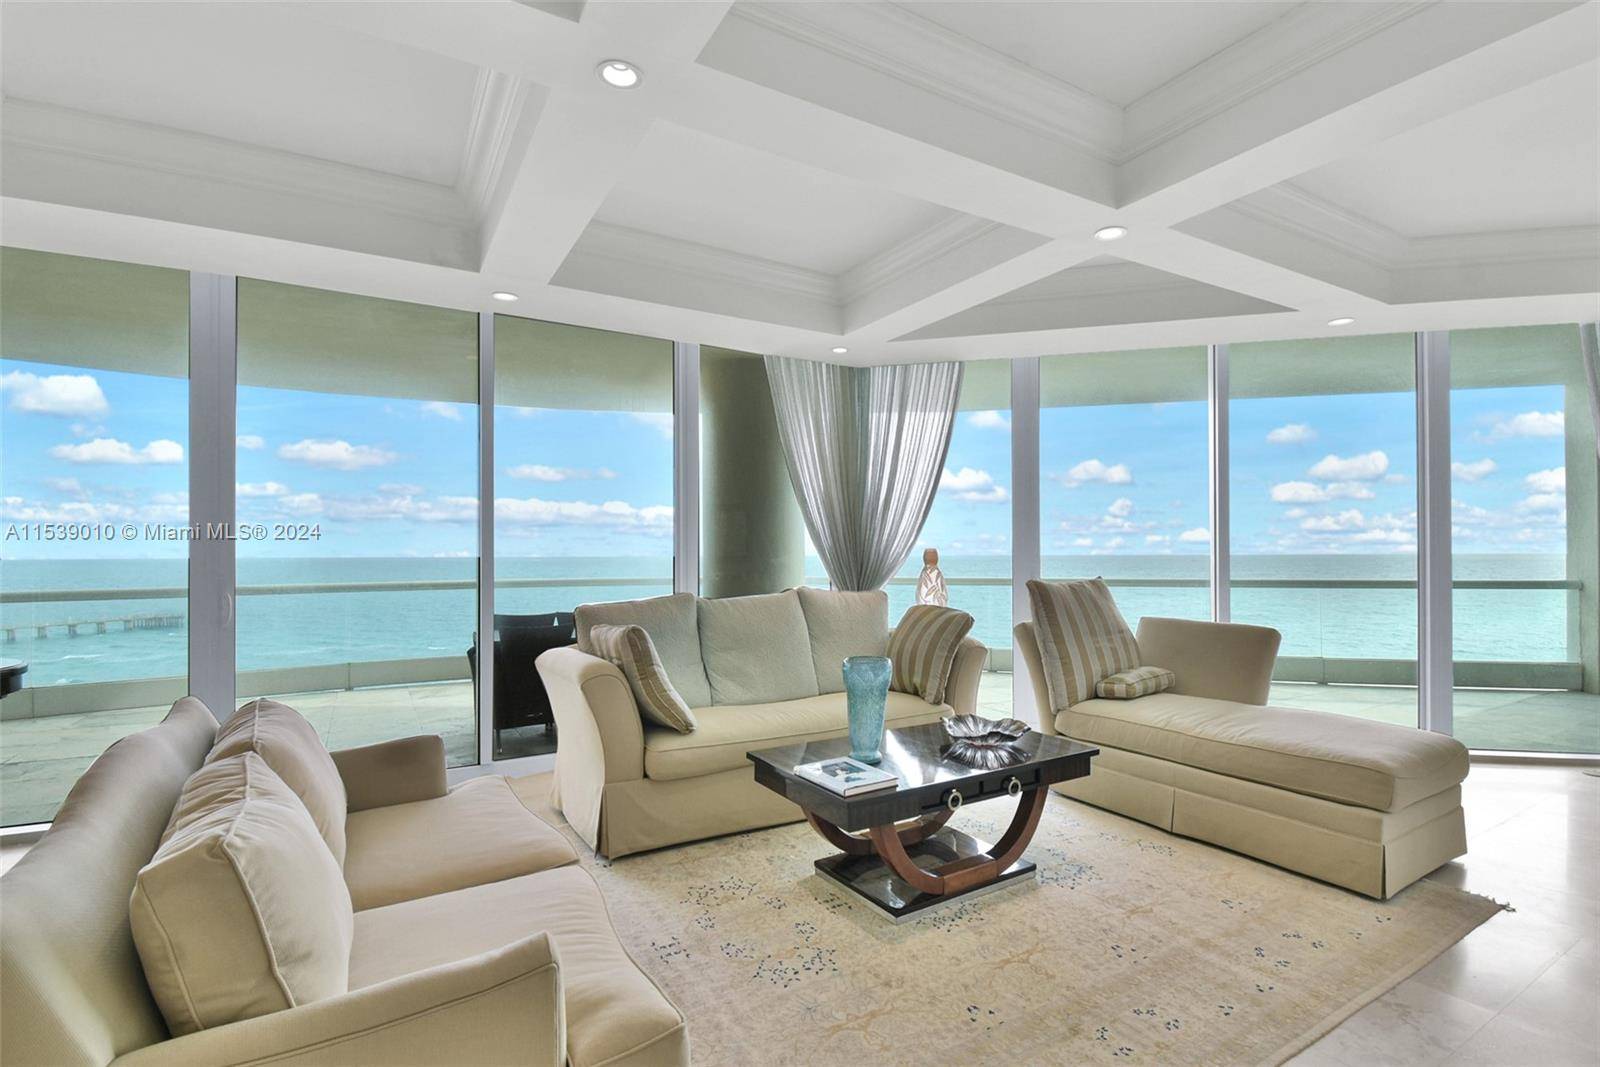 Turnberry Ocean Colony offers this extraordinary residence, providing breathtaking, unobstructed views of the ocean and intracoastal from its NE corner location.